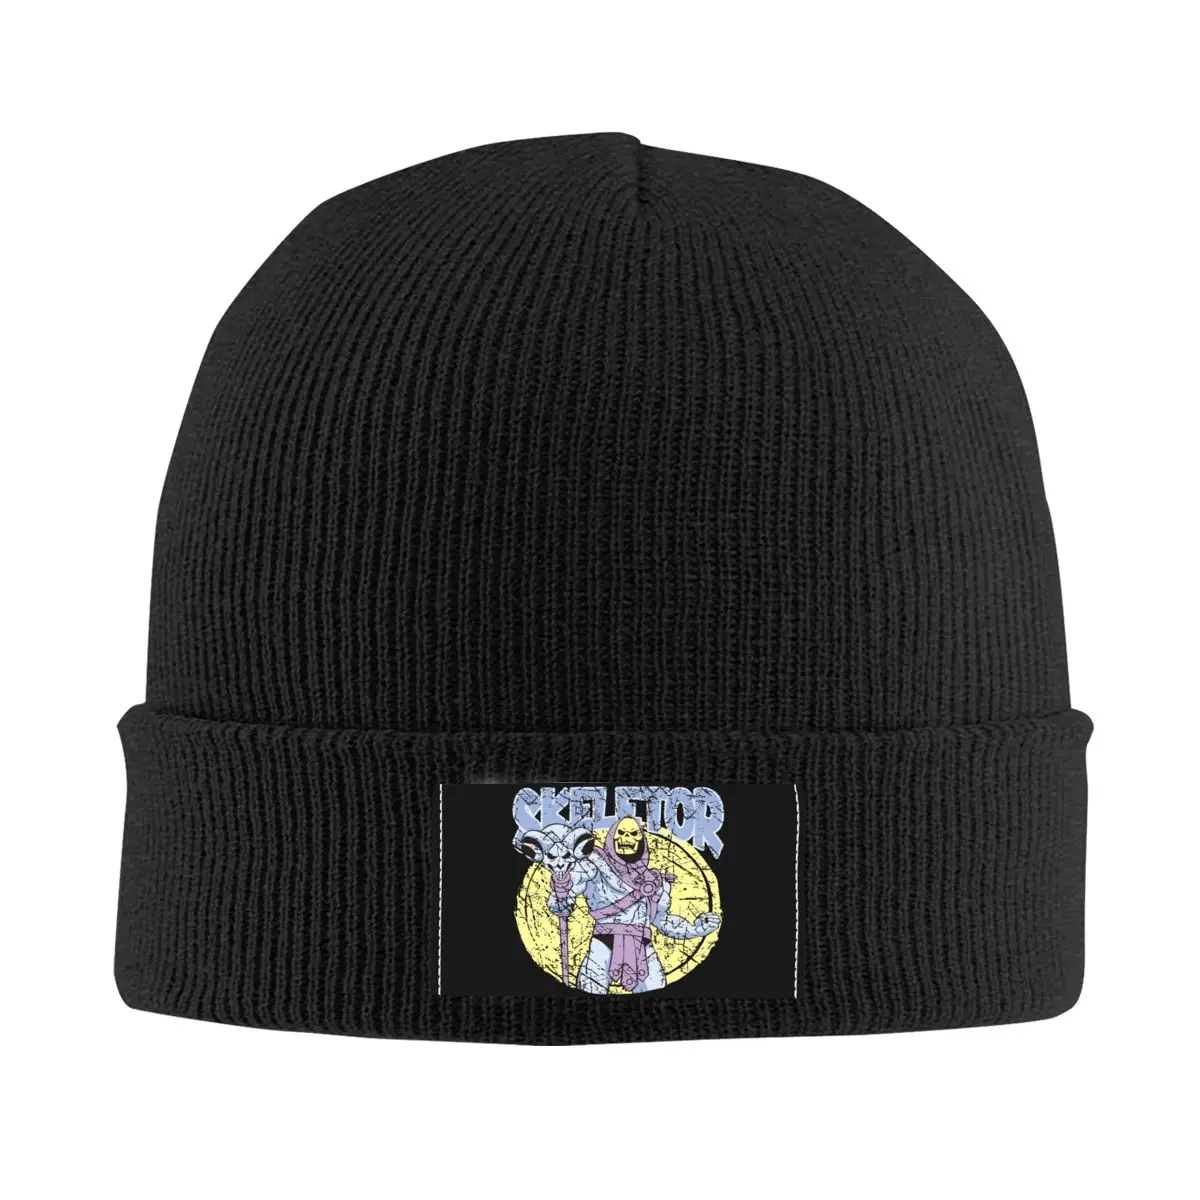 

He-Man And The Masters Of The Universe Skeletor Knit Hat Beanie Autumn Winter Hat Warm Casual Caps for Men Women